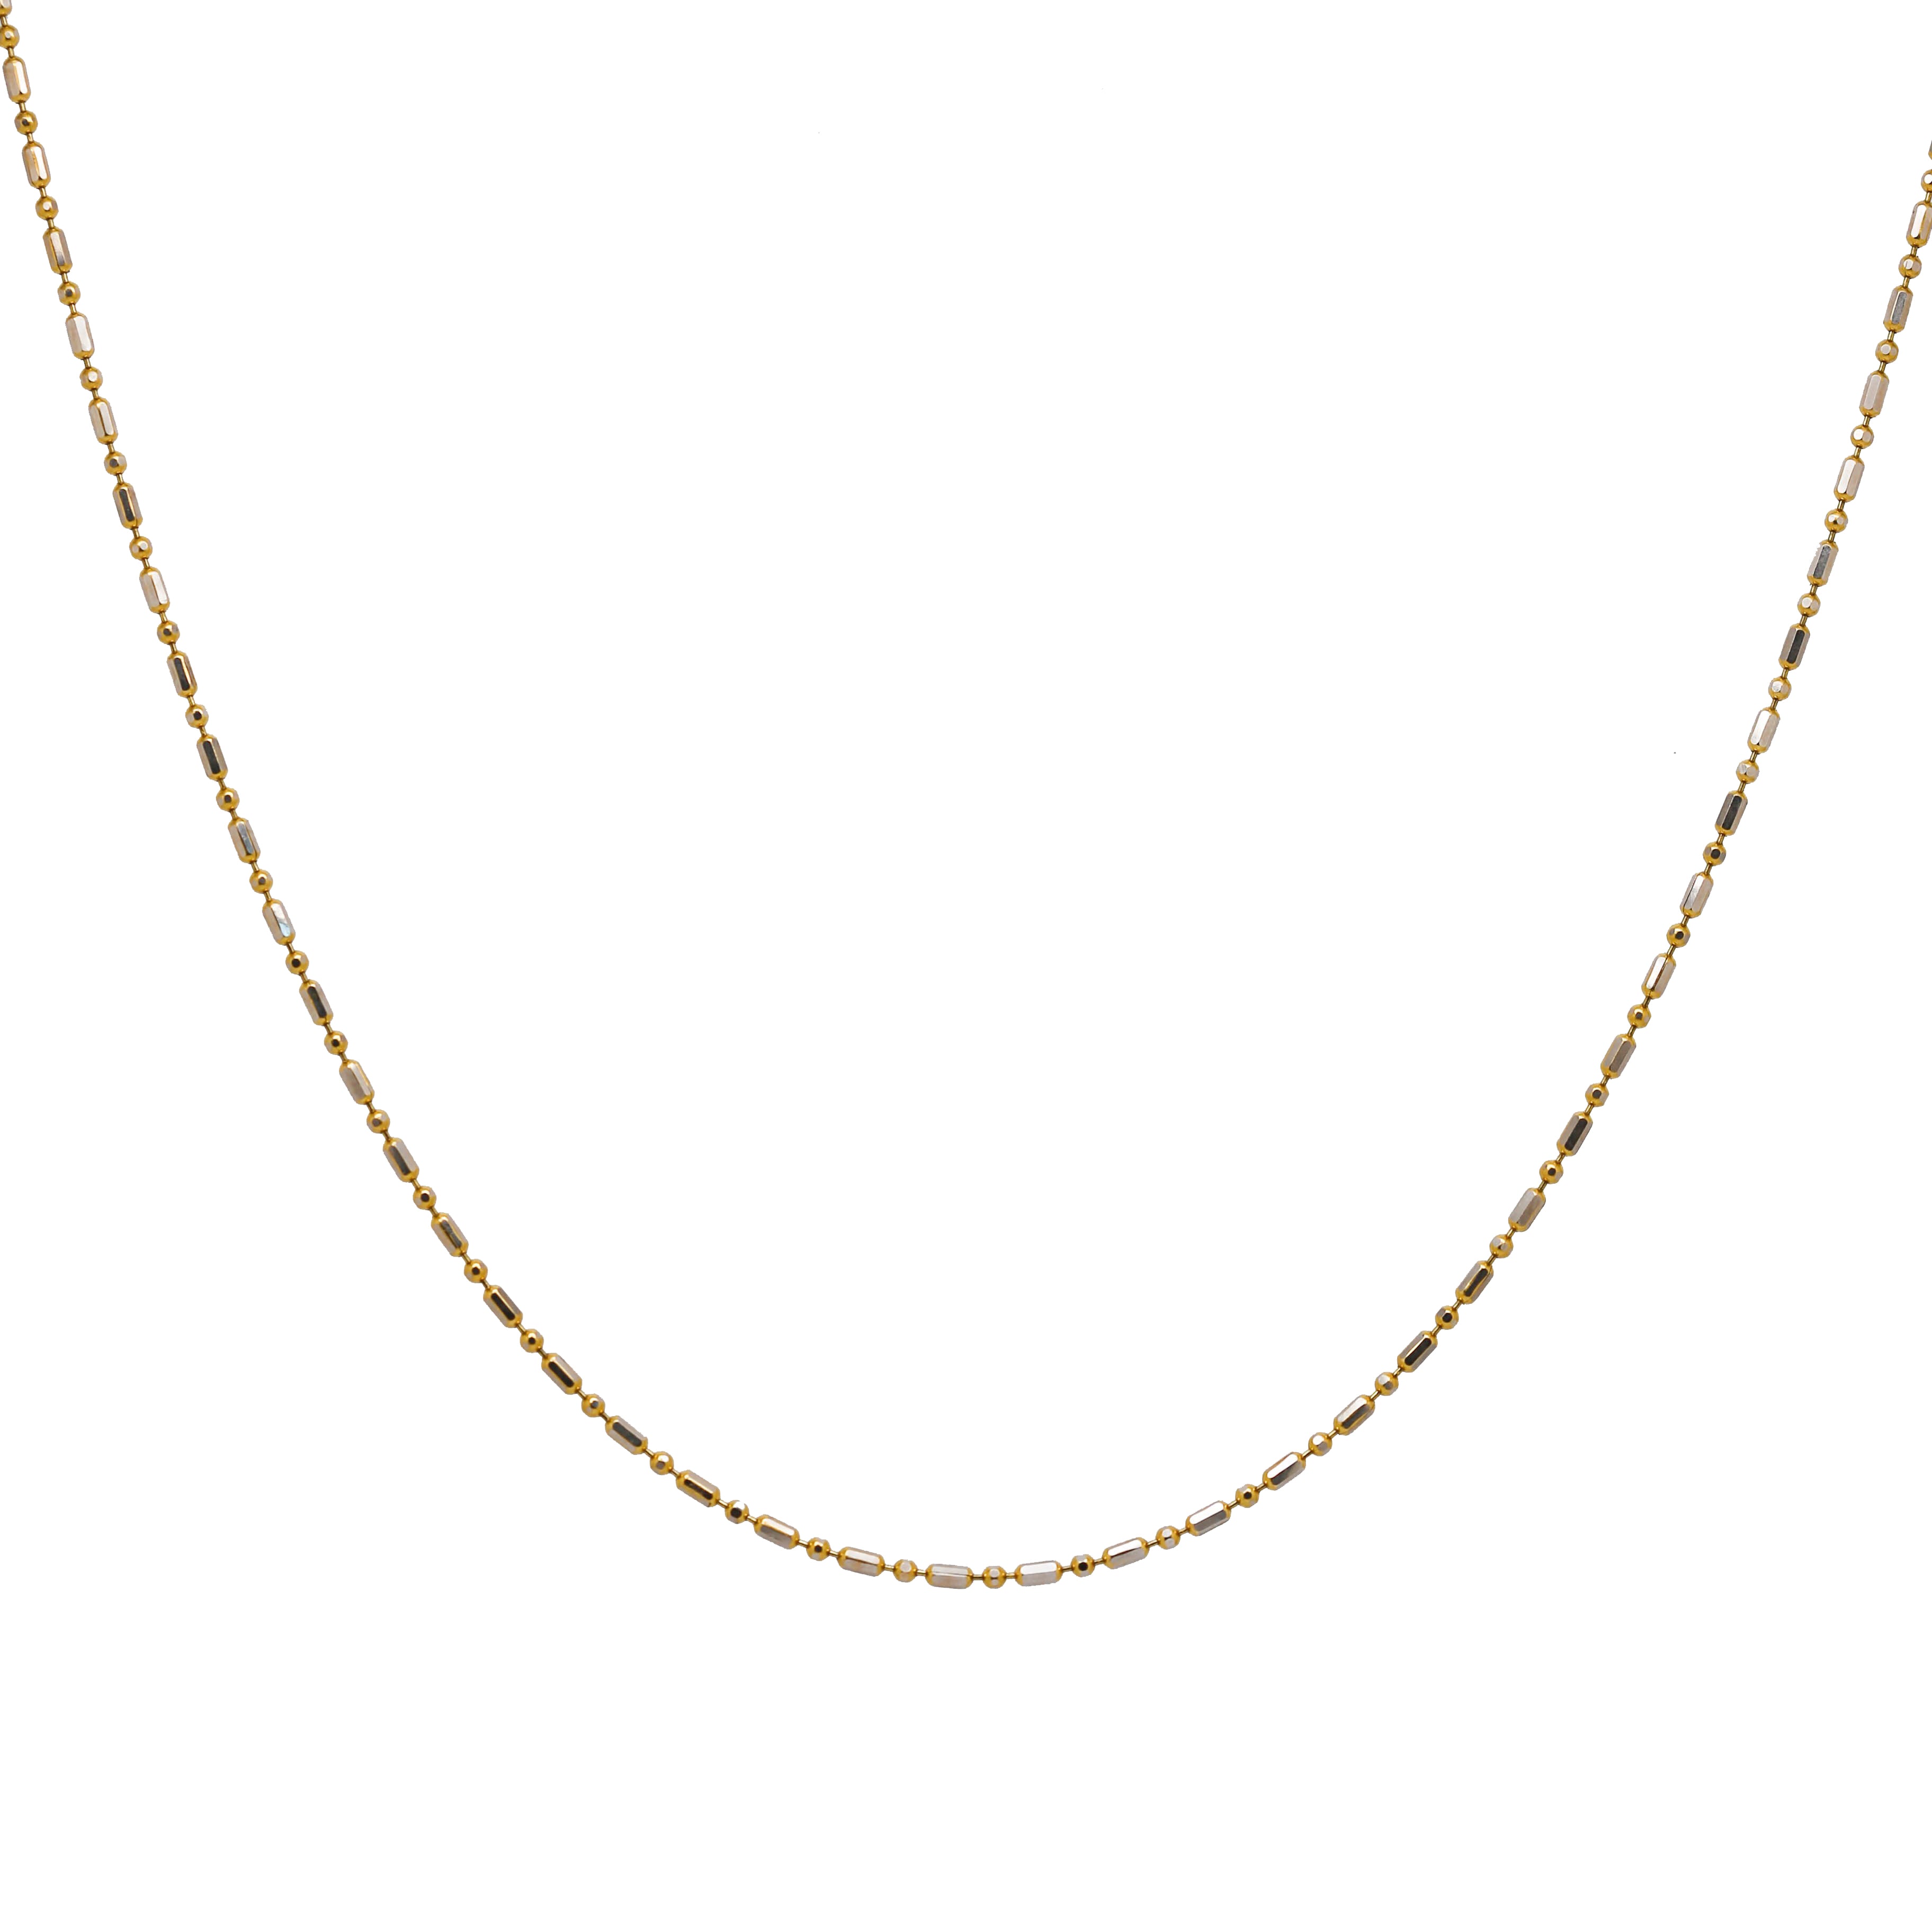 THICK DASH-DOT GOLD BEAD CHAIN NECKLACE